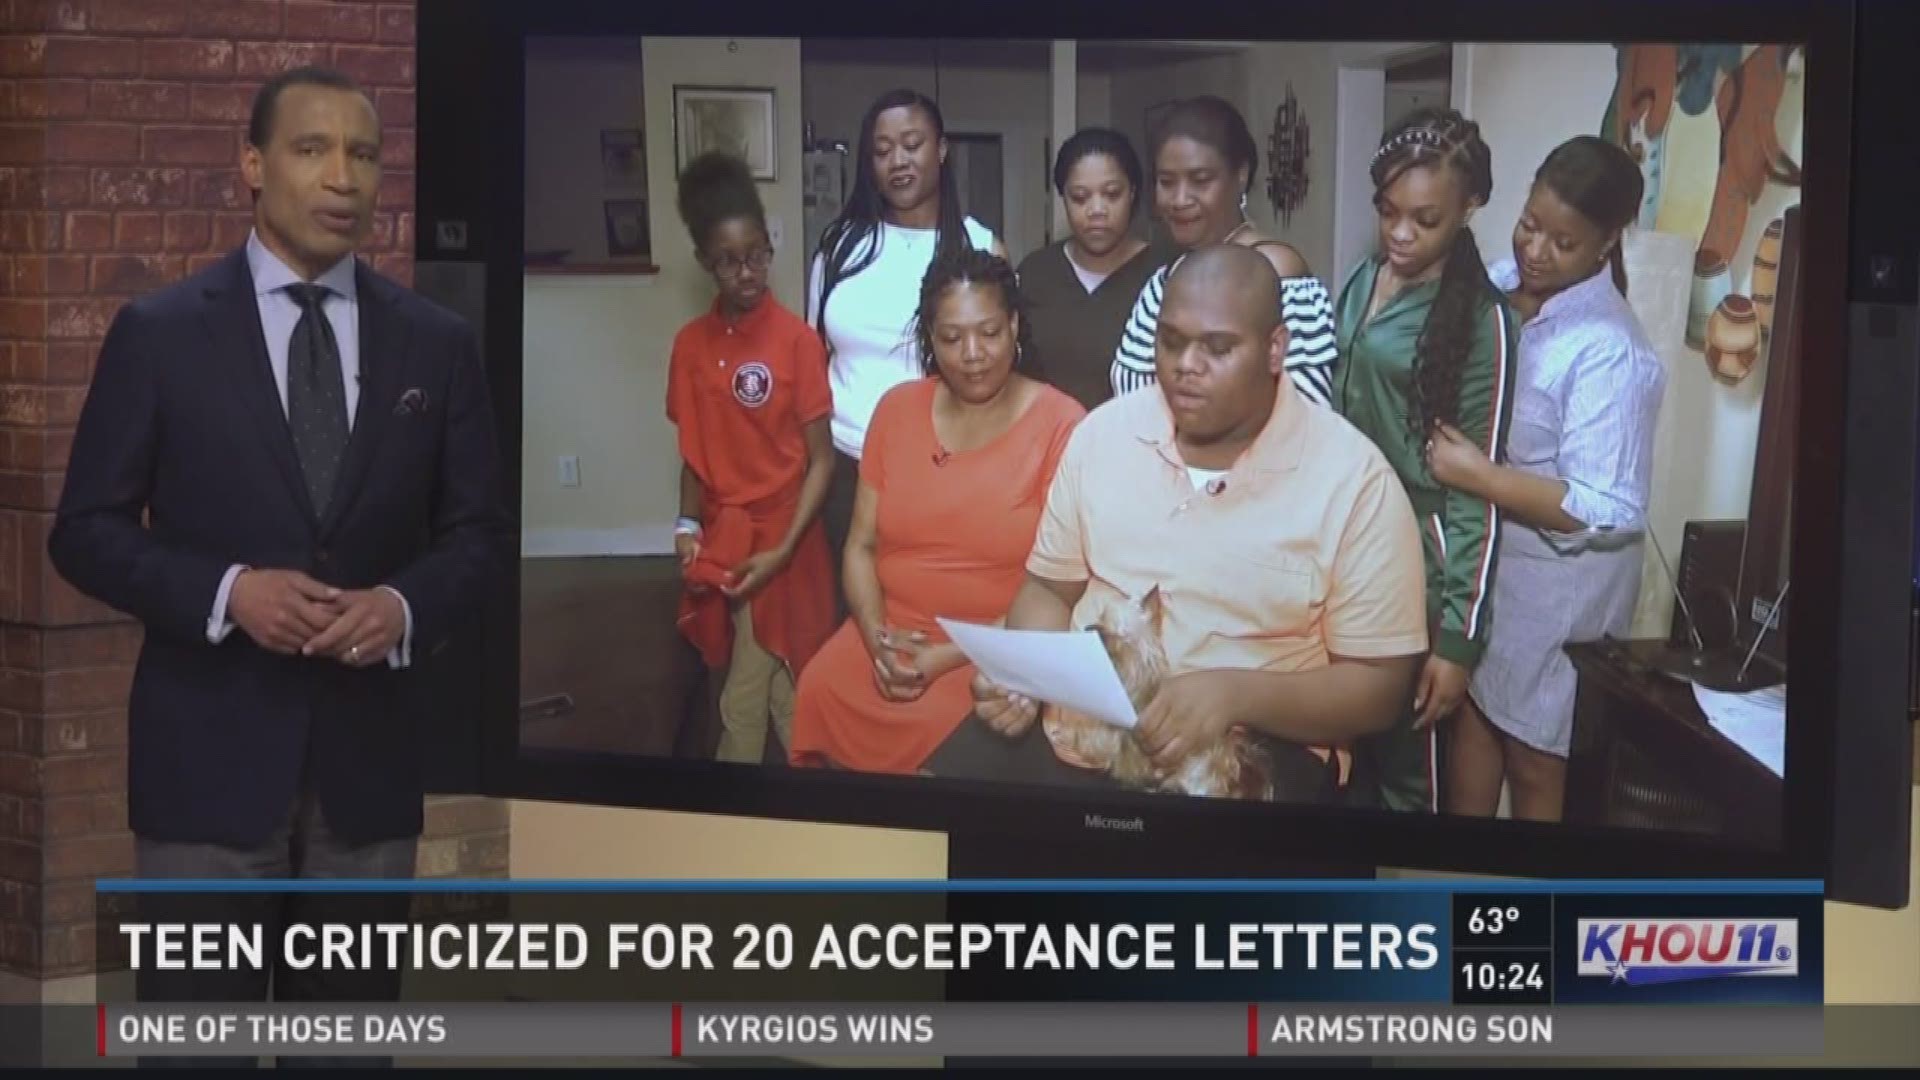 KHOU 11 News Anchor Len Cannon shares his thoughts after some news anchors in D.C. criticized a Houston teen who was accepted to 20 universities.